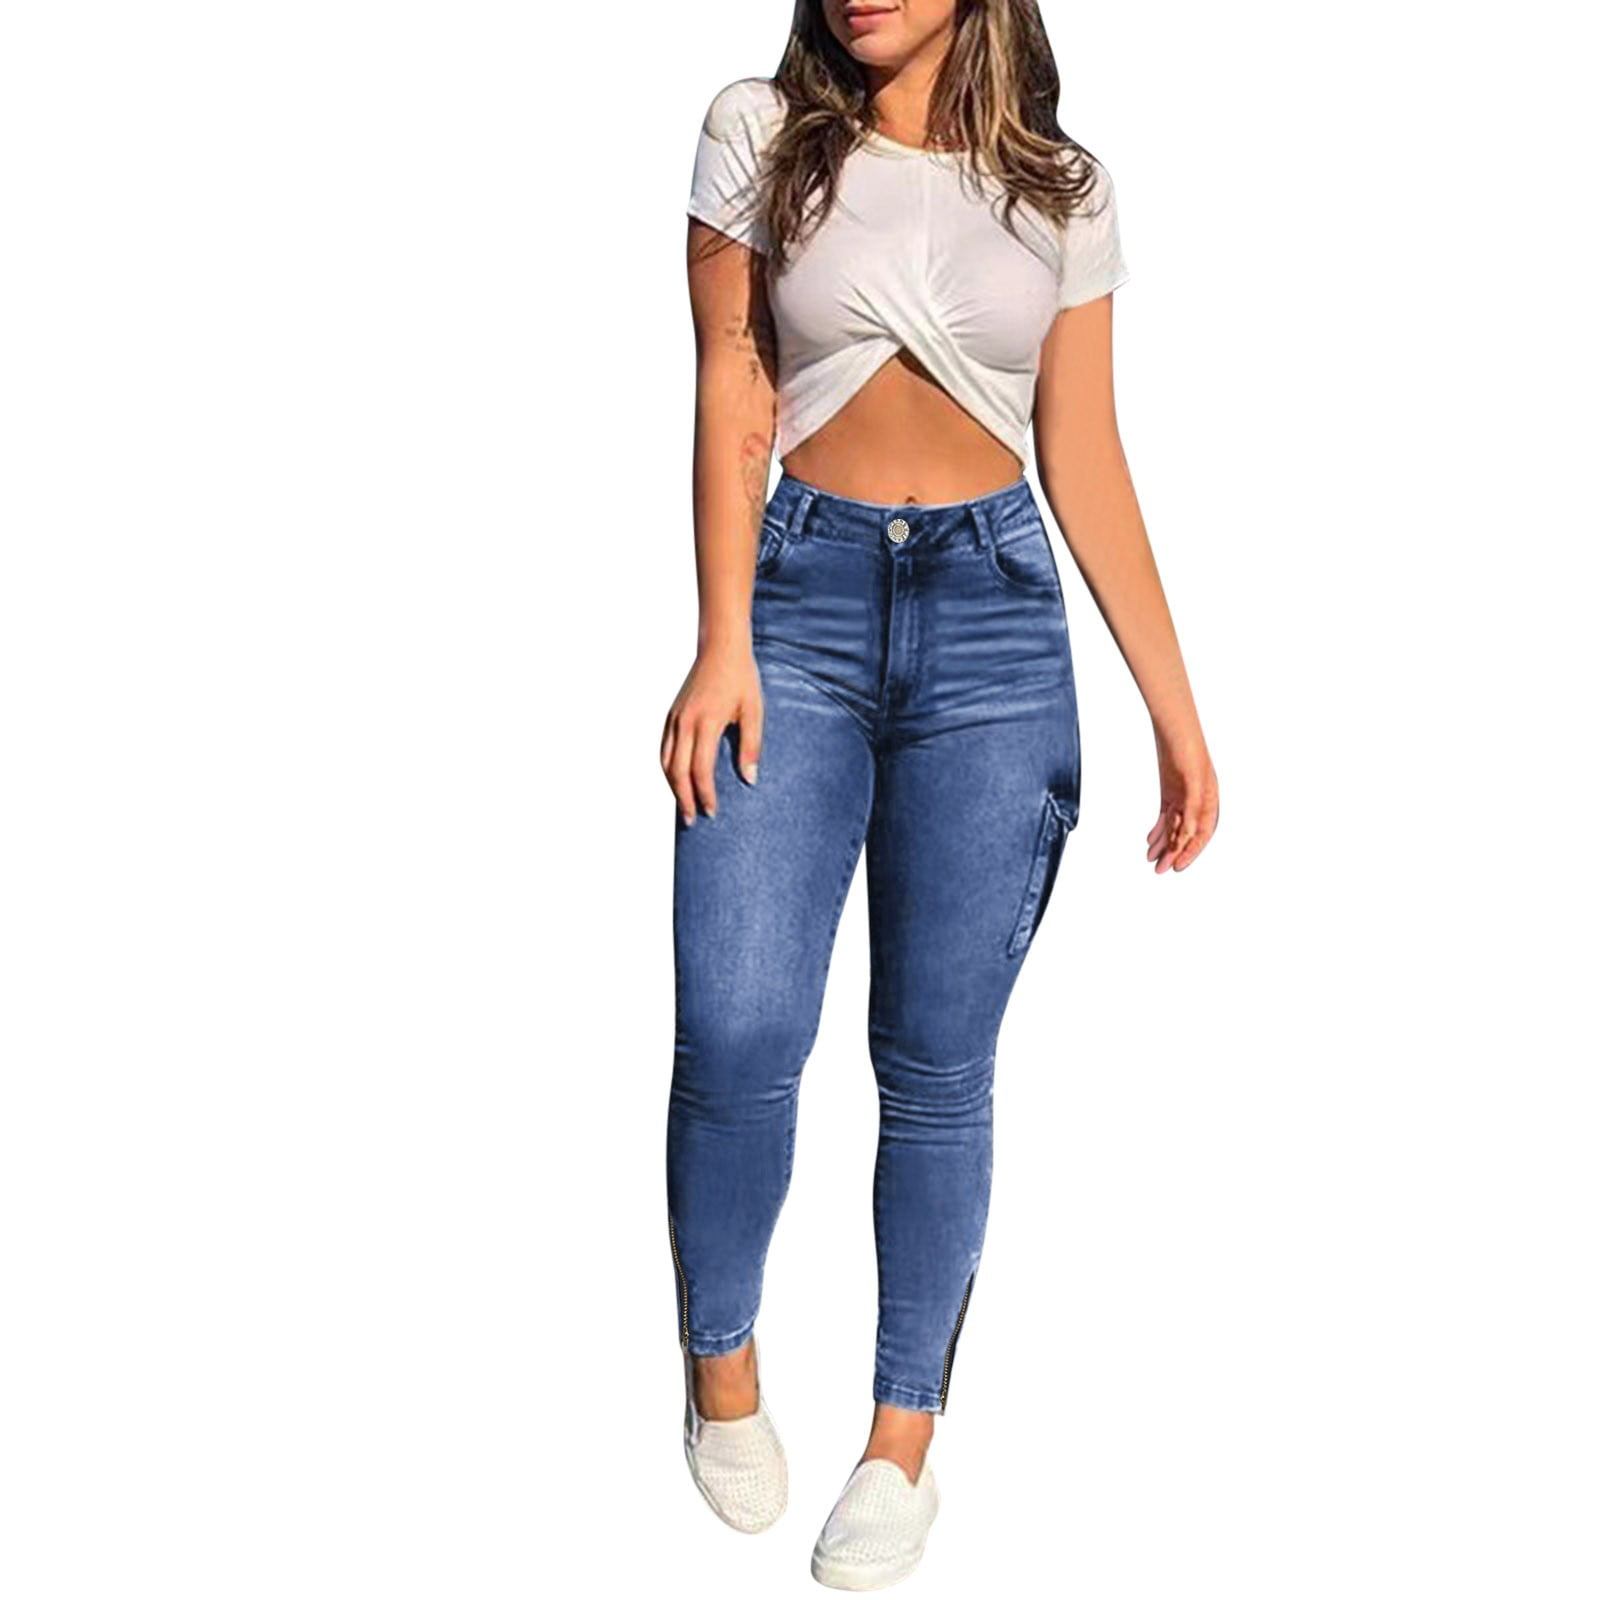 vbnergoie Womens Skinny Jeans Casual Mid Waist Pants Trousers Pockets  Classic Denim Jeans White Pants for Women Jeans Ripped Woman Designer Jeans  High Waist 